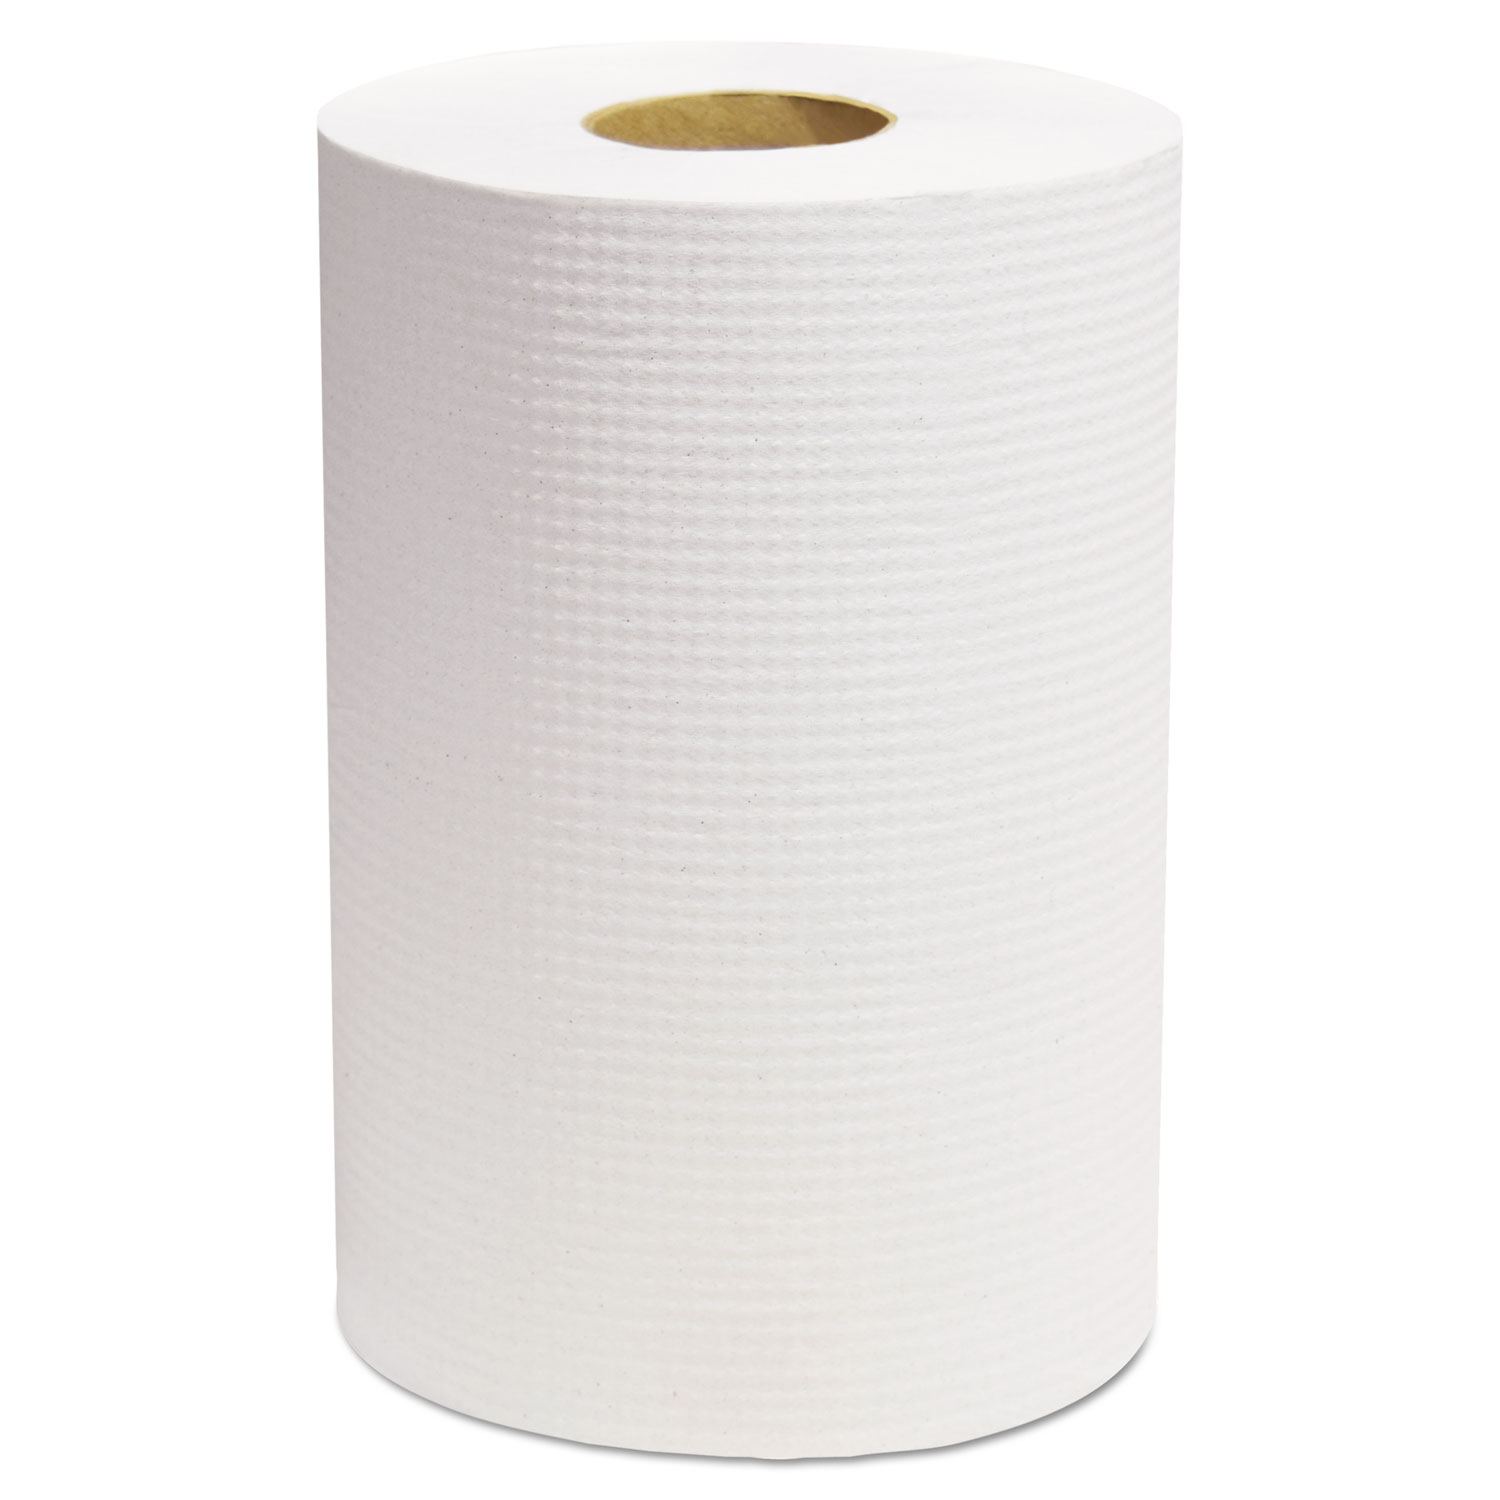 Select Roll Paper Towels, White, 7 7/8" x 350 ft, 12/Carton